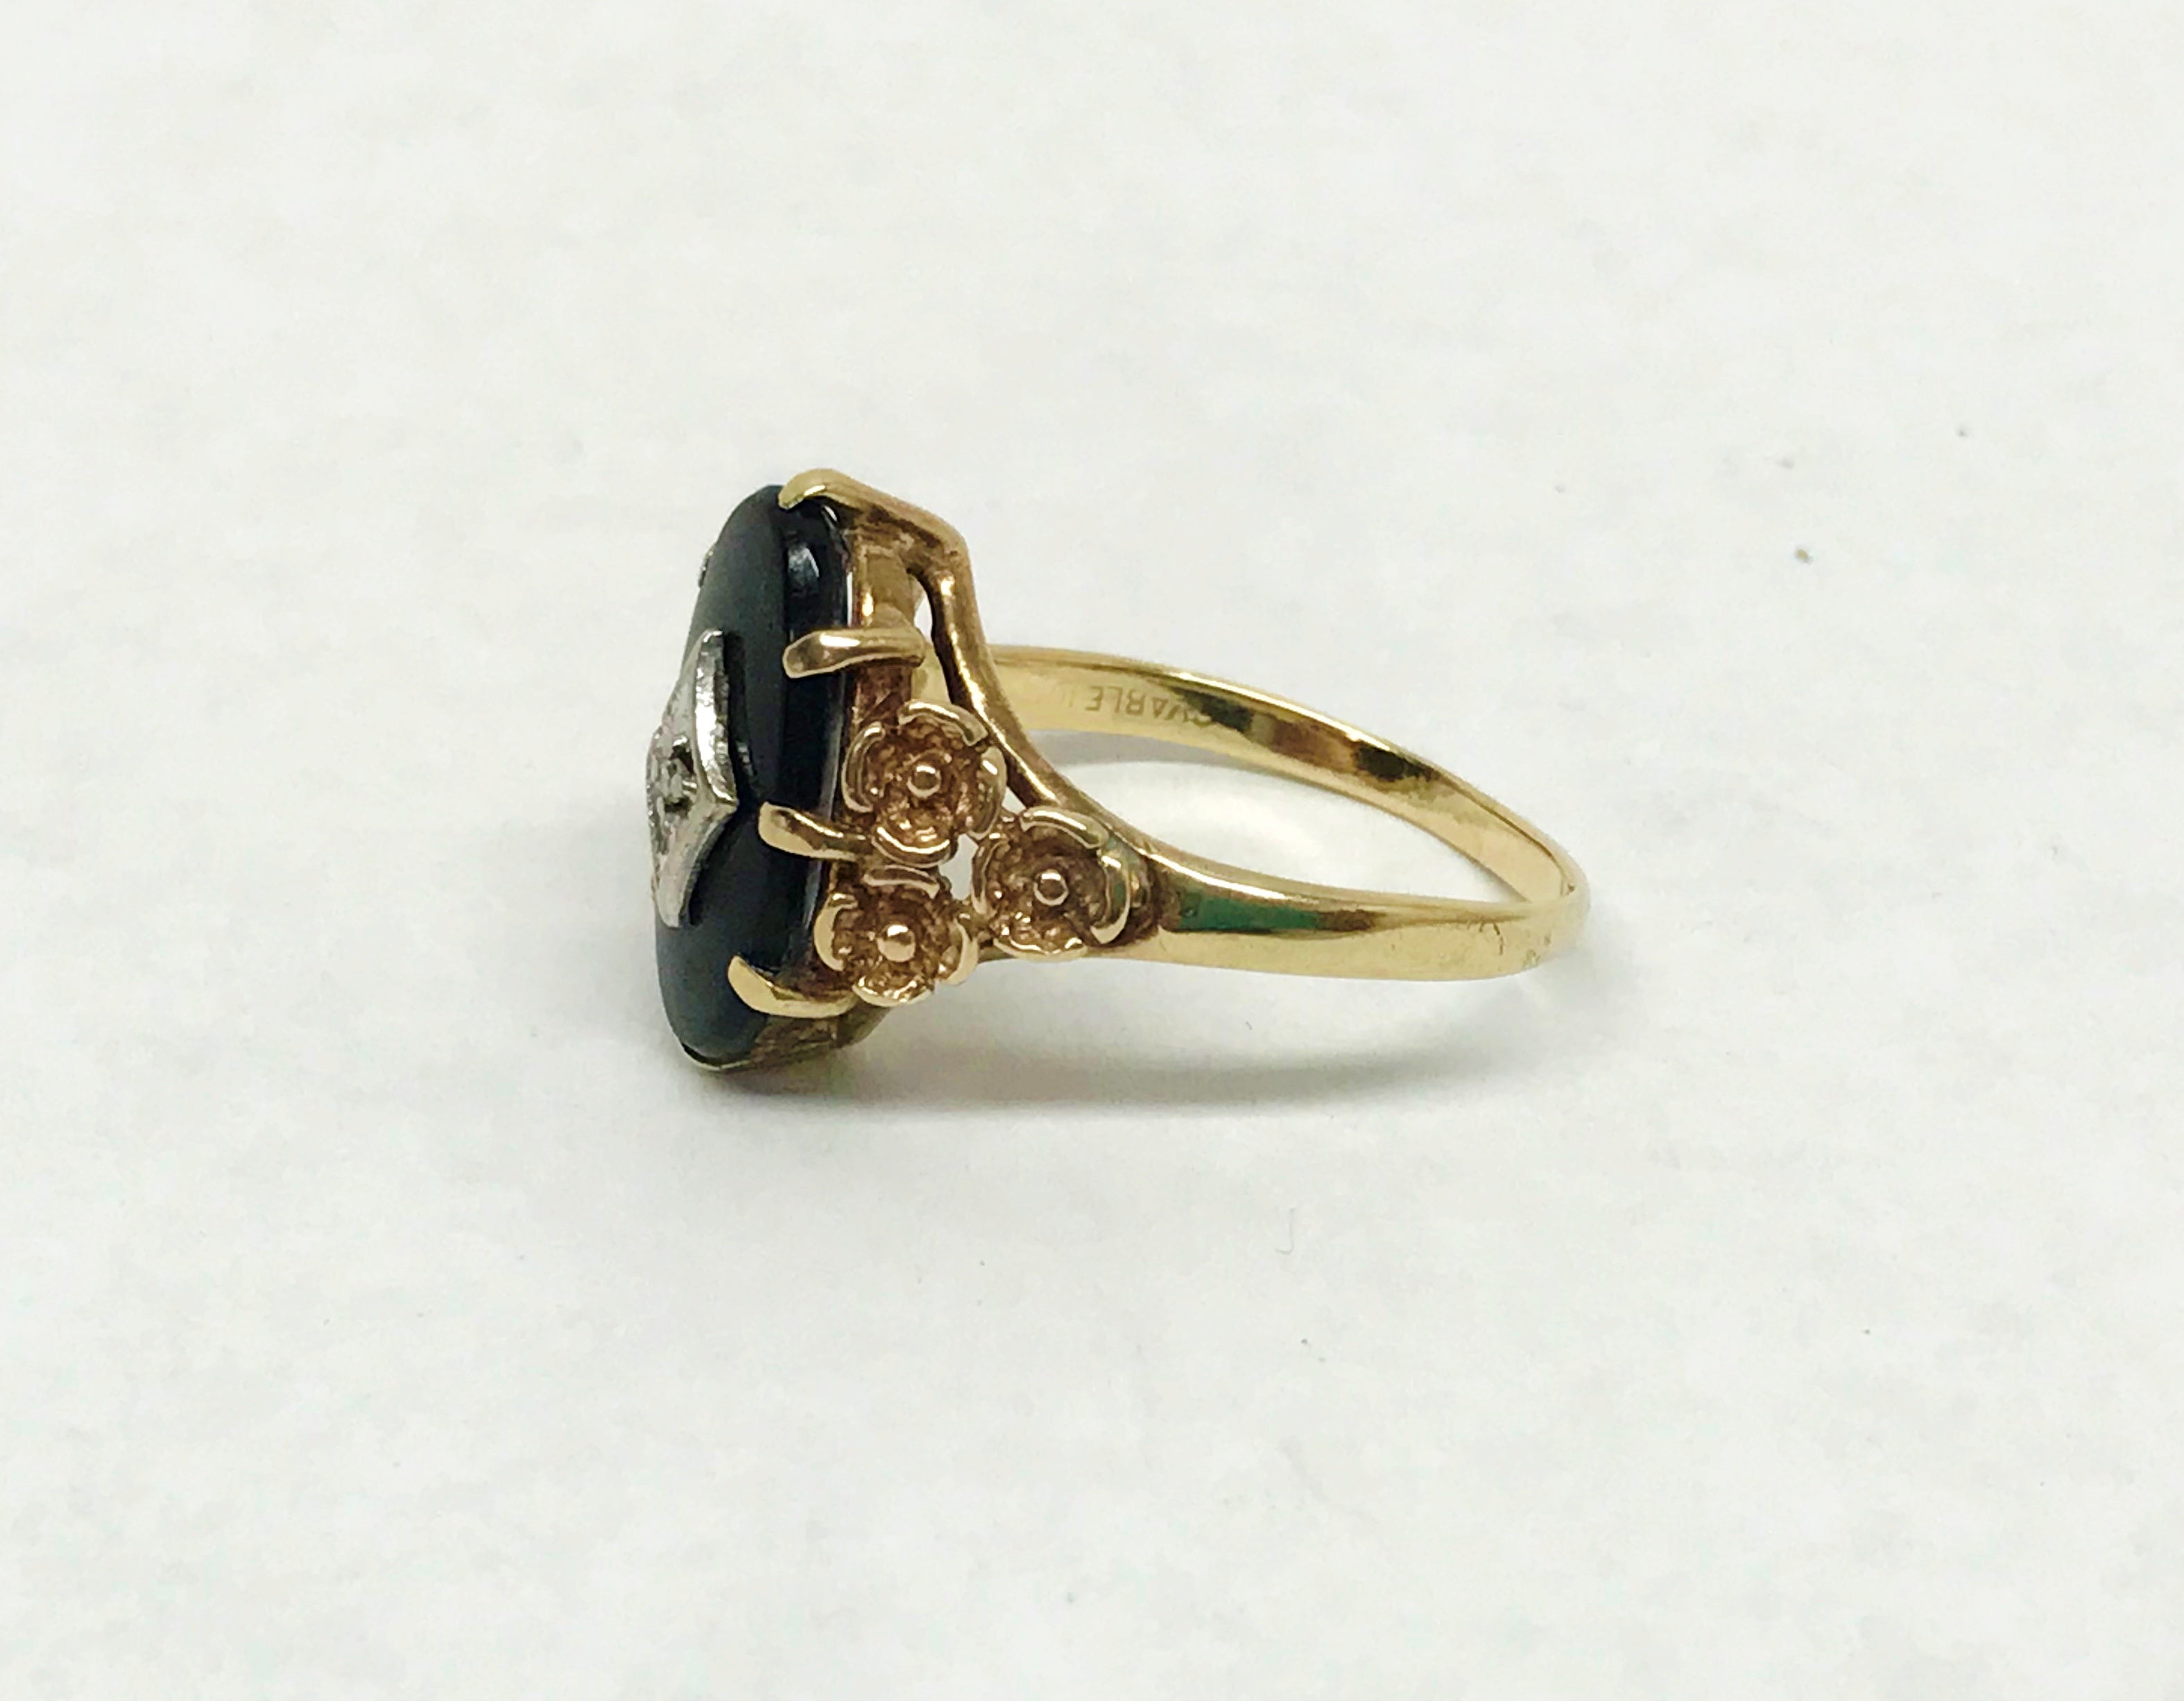 VINTAGE STYLE YELLOW GOLD BLACK ONYX RING SIZE 6.5 – Bass Fine Jewelry